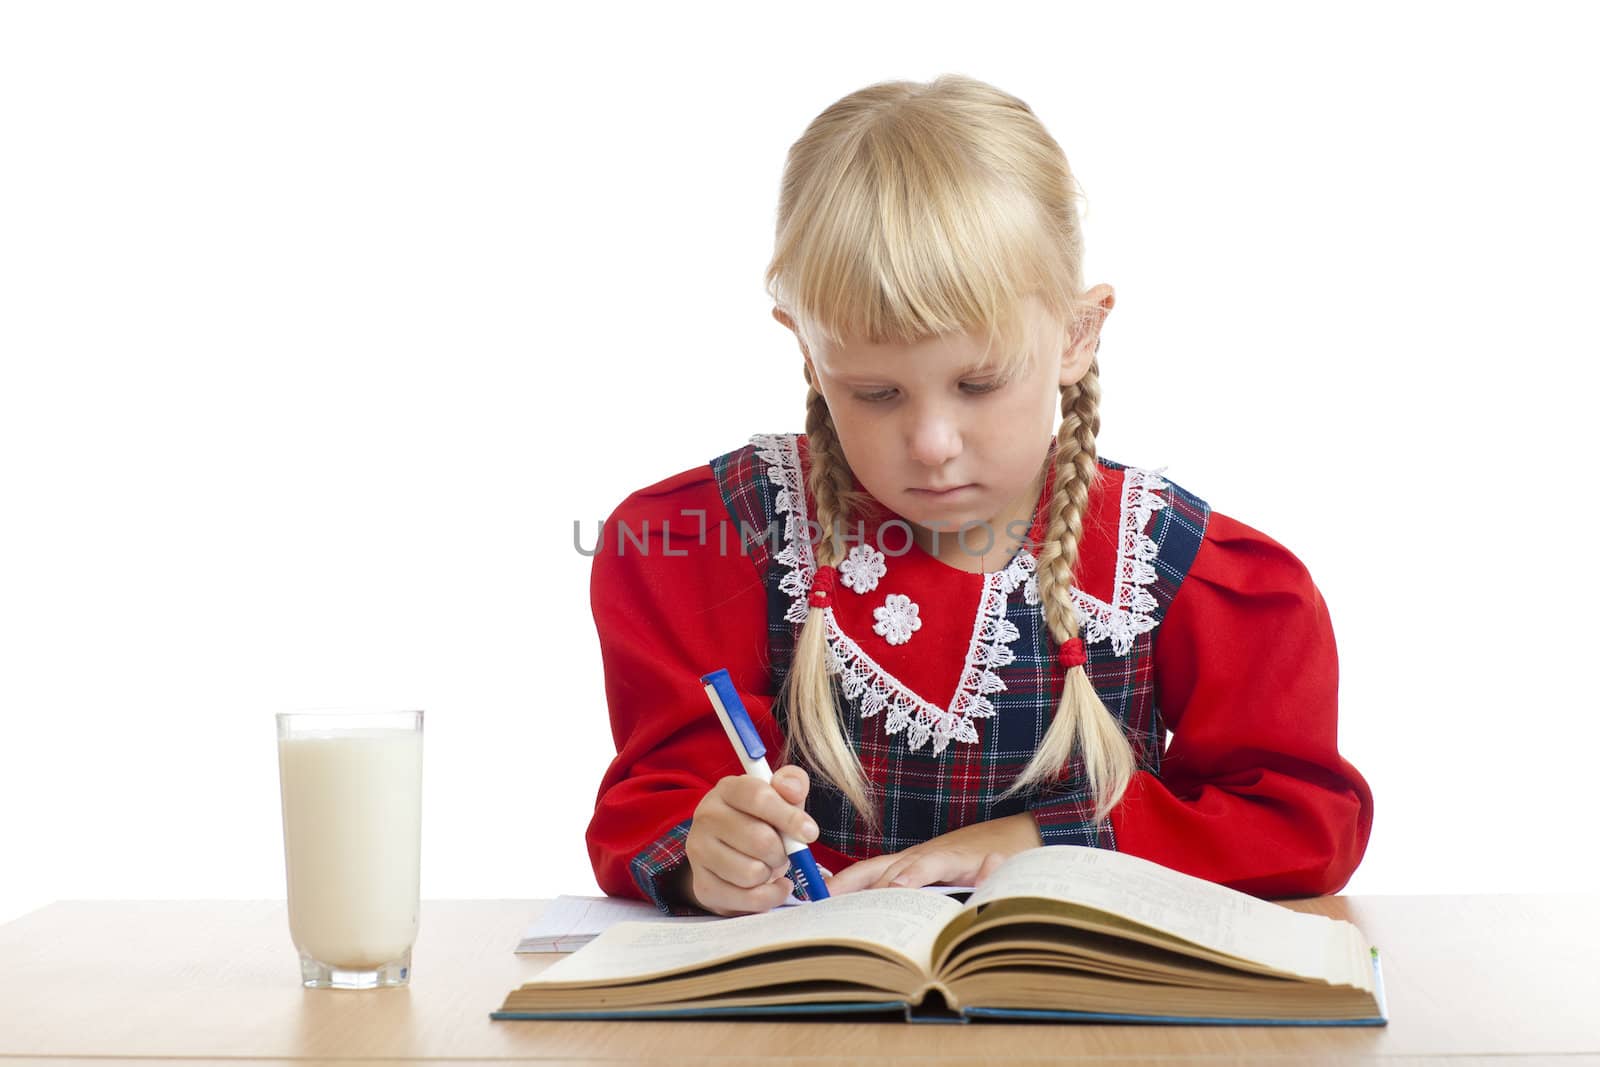 small girl writing and a glass of milk